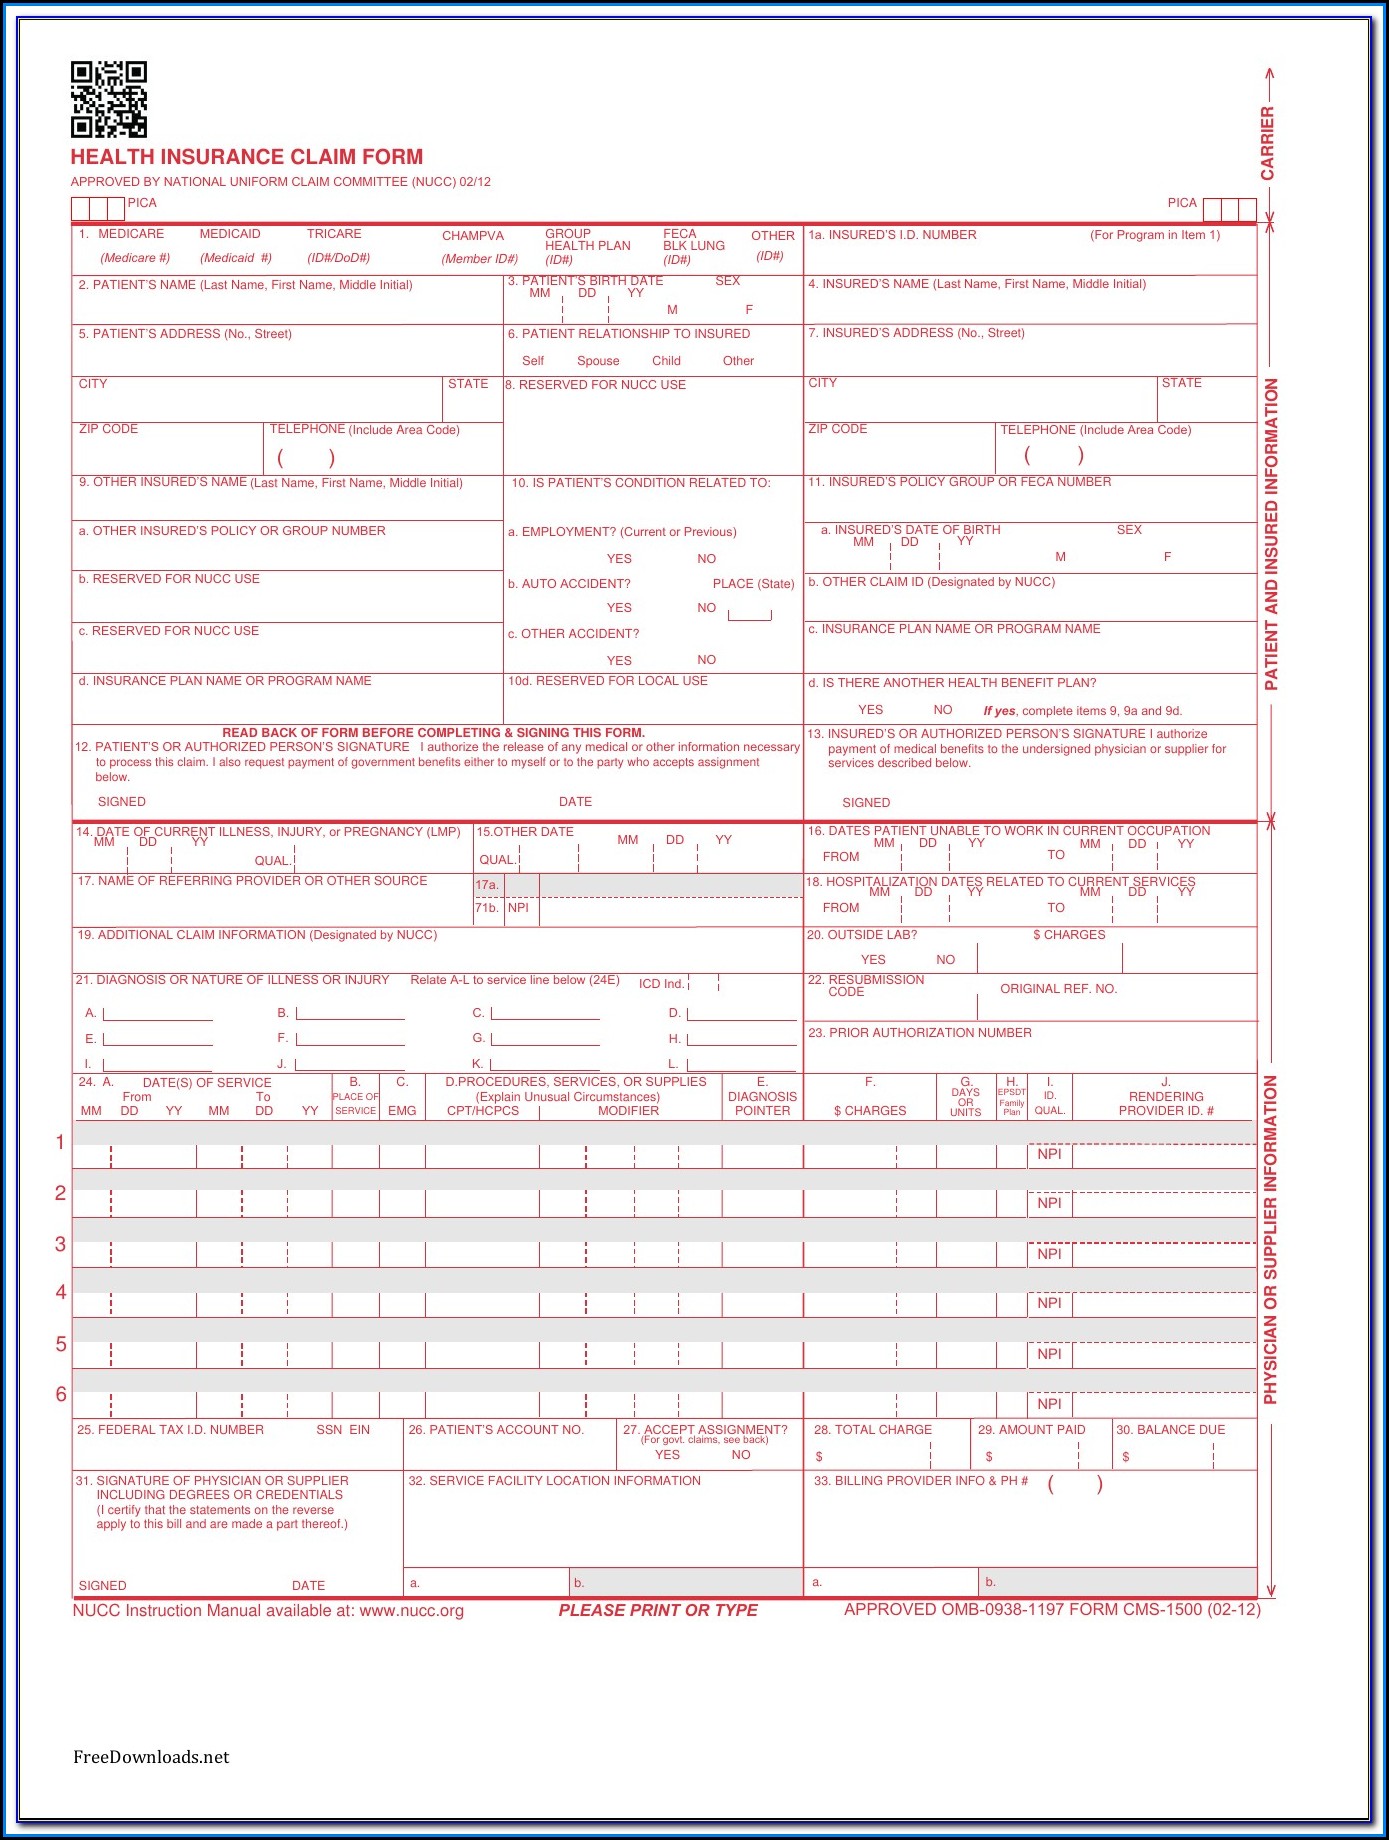 Form Cms 1500 Free Download